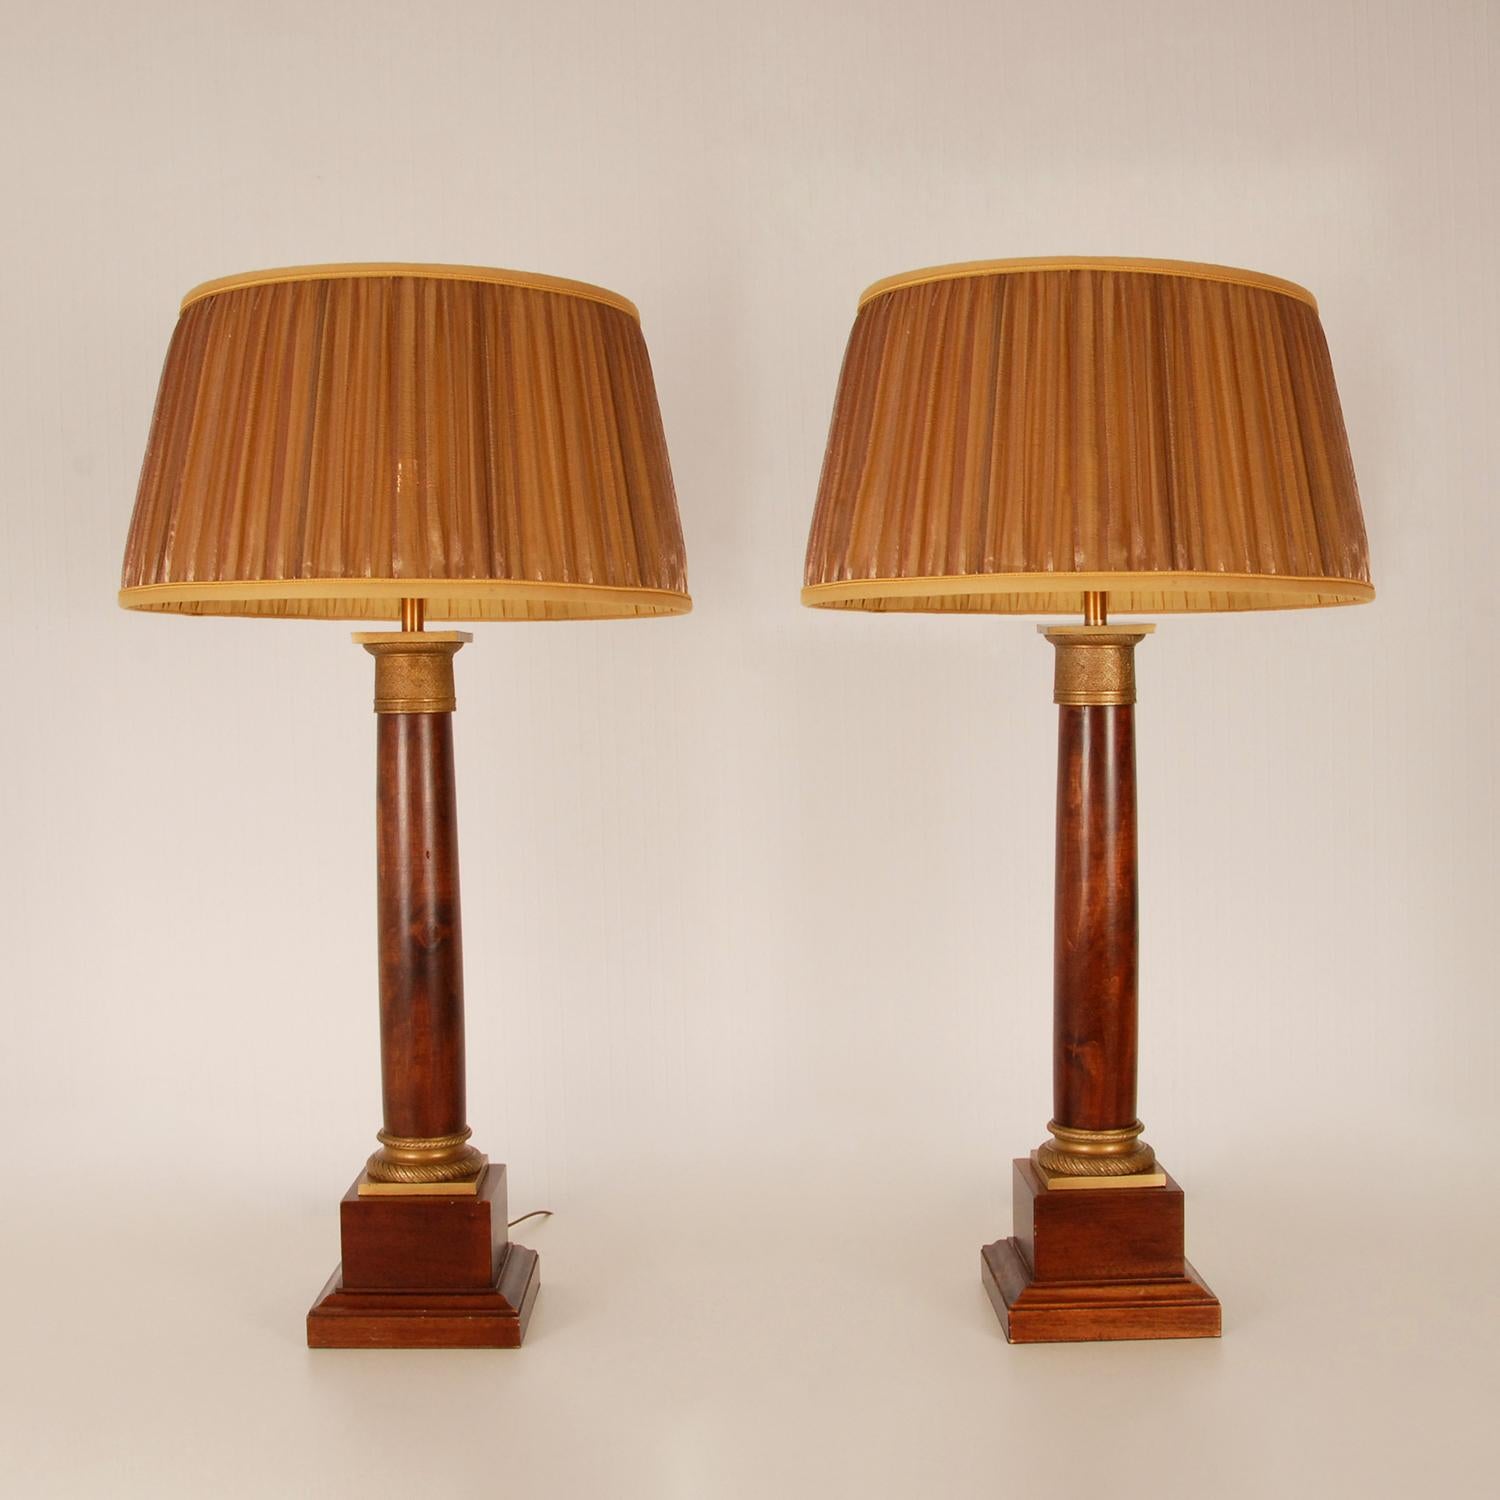 A tall French gilt bronze and faux Mahogany table lamp
Made of bronze and fruitwood columns
The lampshade is for illustration purpose only and not included
The lamps is in a gently used good condition.
Style Empire, Neoclassical, Napoleonic in